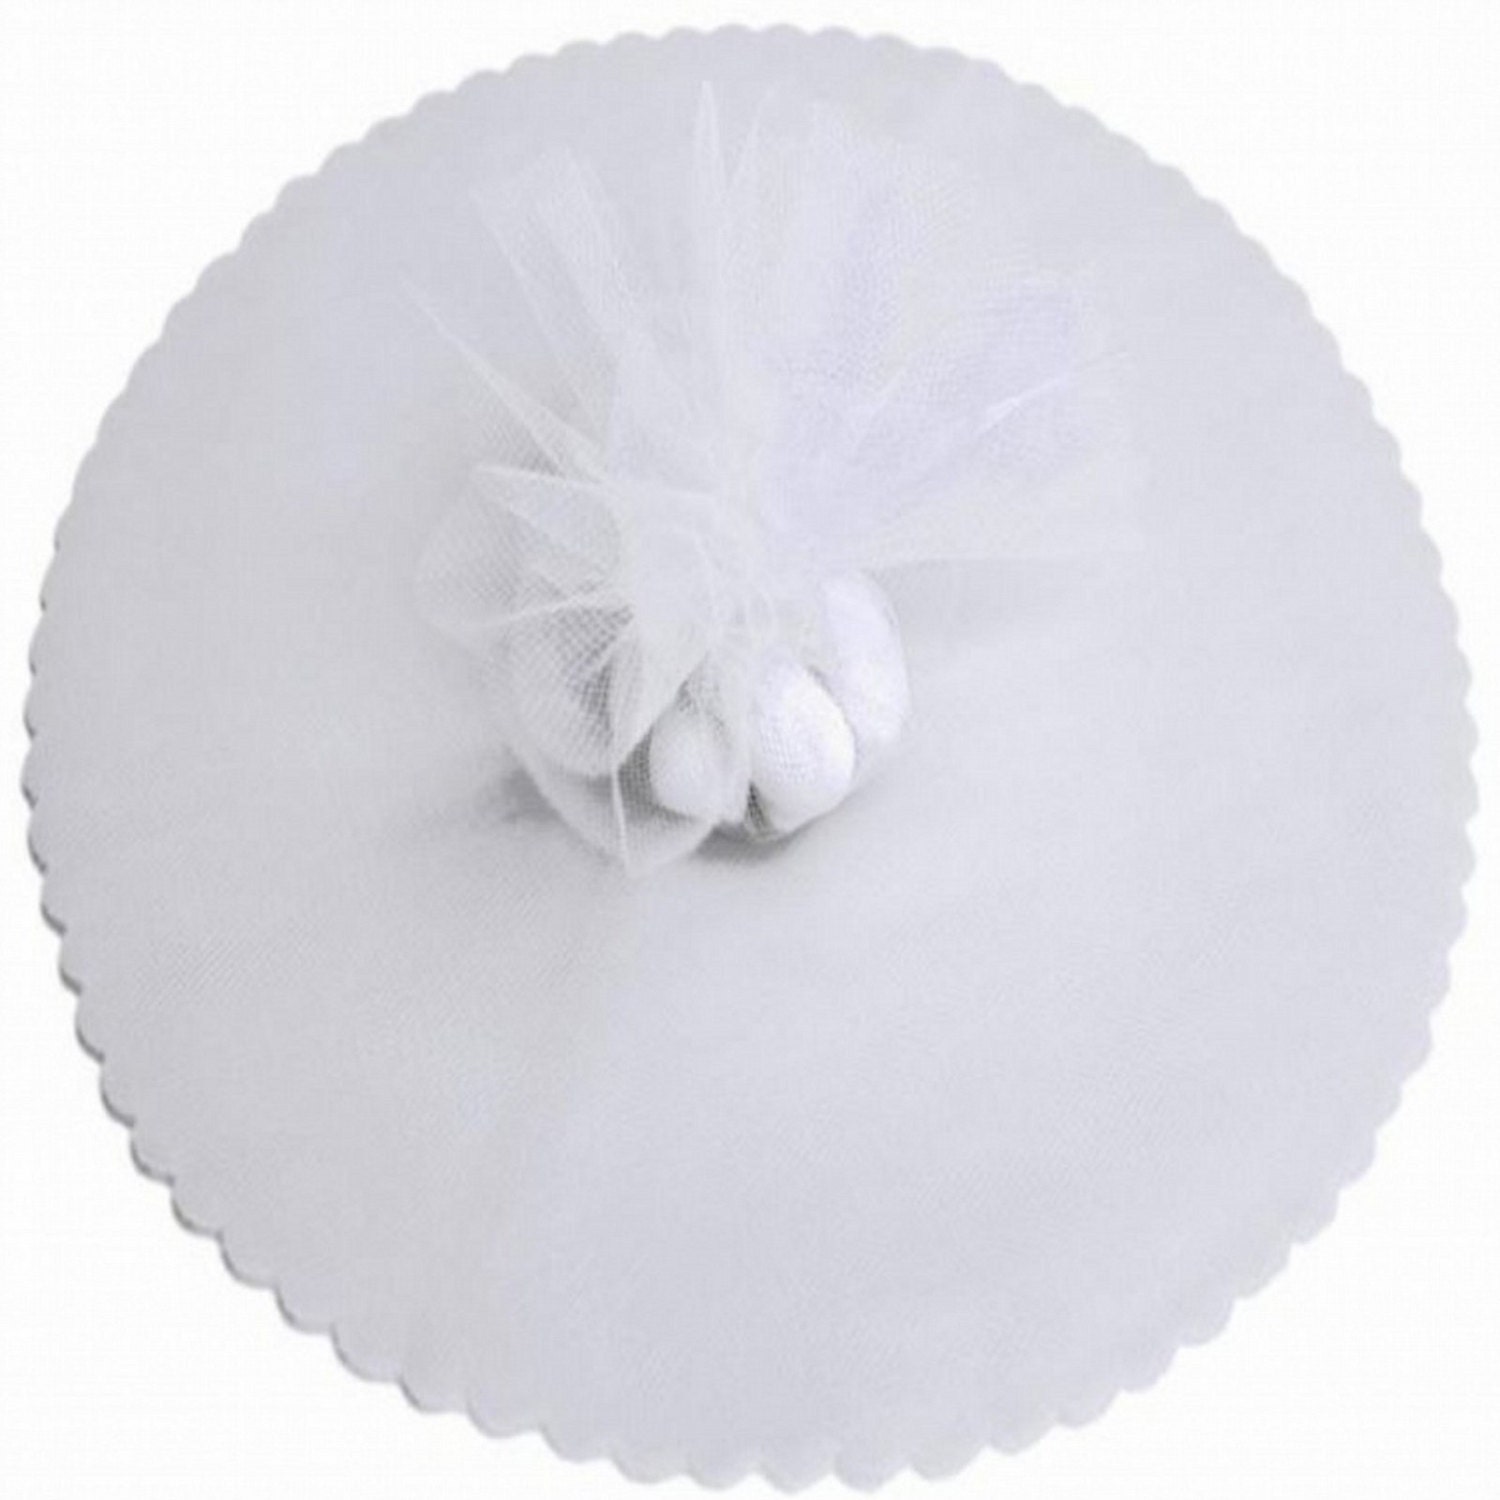 EXCEART 3 Rolls White Fabric Wedding Fabric Tulle Craft Ribbon Tulle Fabric  White Ribbon Tulle Spool Wedding Decor Tulle Ribbon for Gift Wrapping Tutu